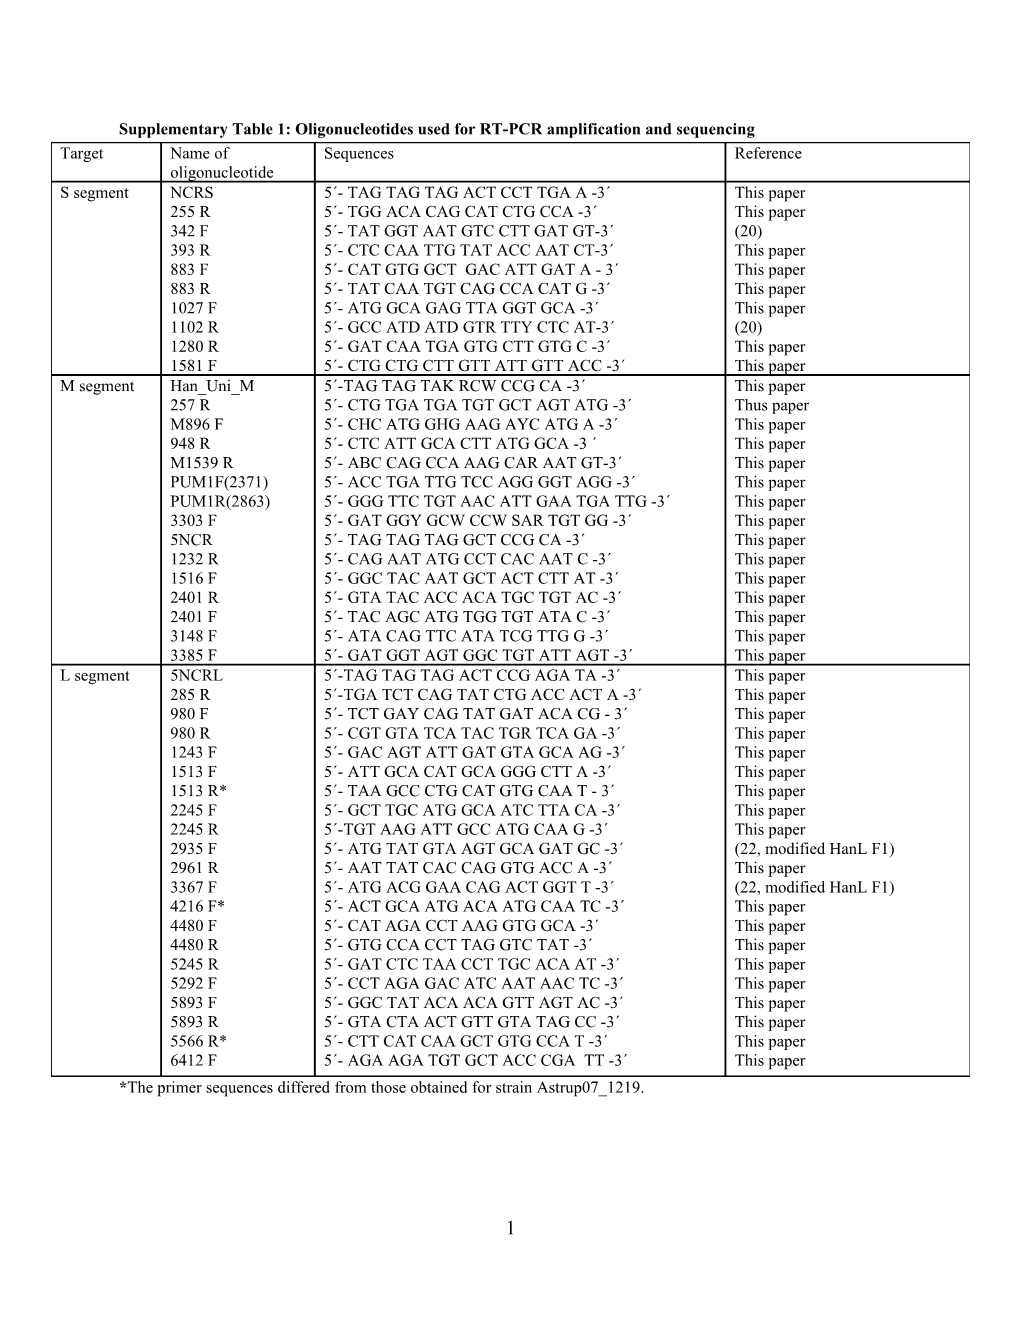 Supplementary Table 1: Oligonucleotides Used for RT-PCR Amplification and Sequencing